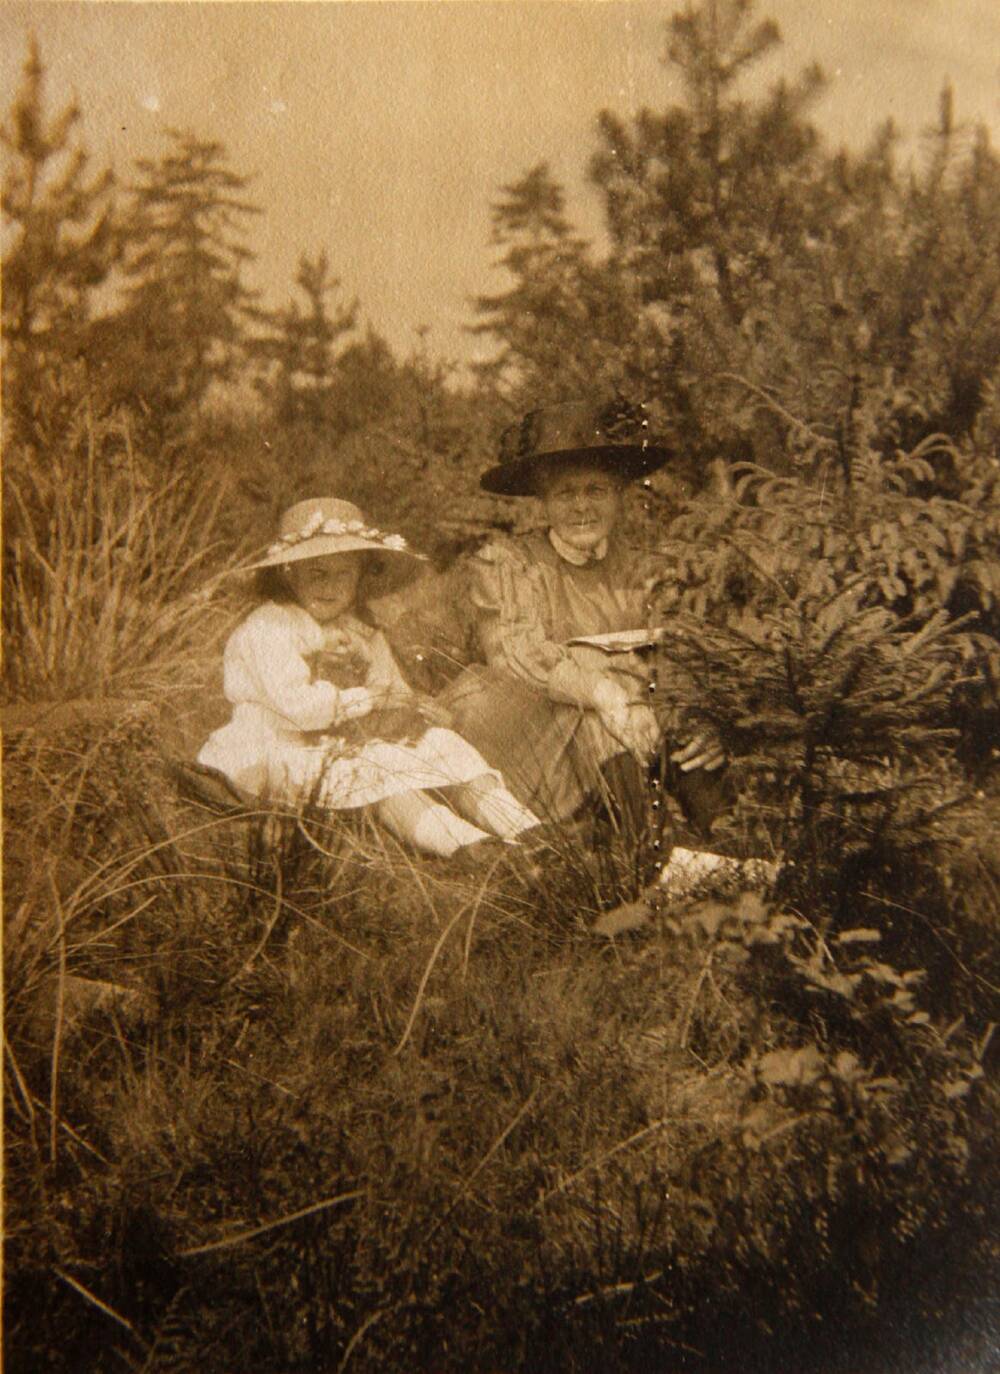 A black and white photo of an older woman sitting next to a young girl on a grassy bank. Trees and shrubs surround them. Both wear wide-brimmed hats to shield their faces from the sun. The woman is wearing a grey or brown dress; the little girl is wearing a bright white dress.